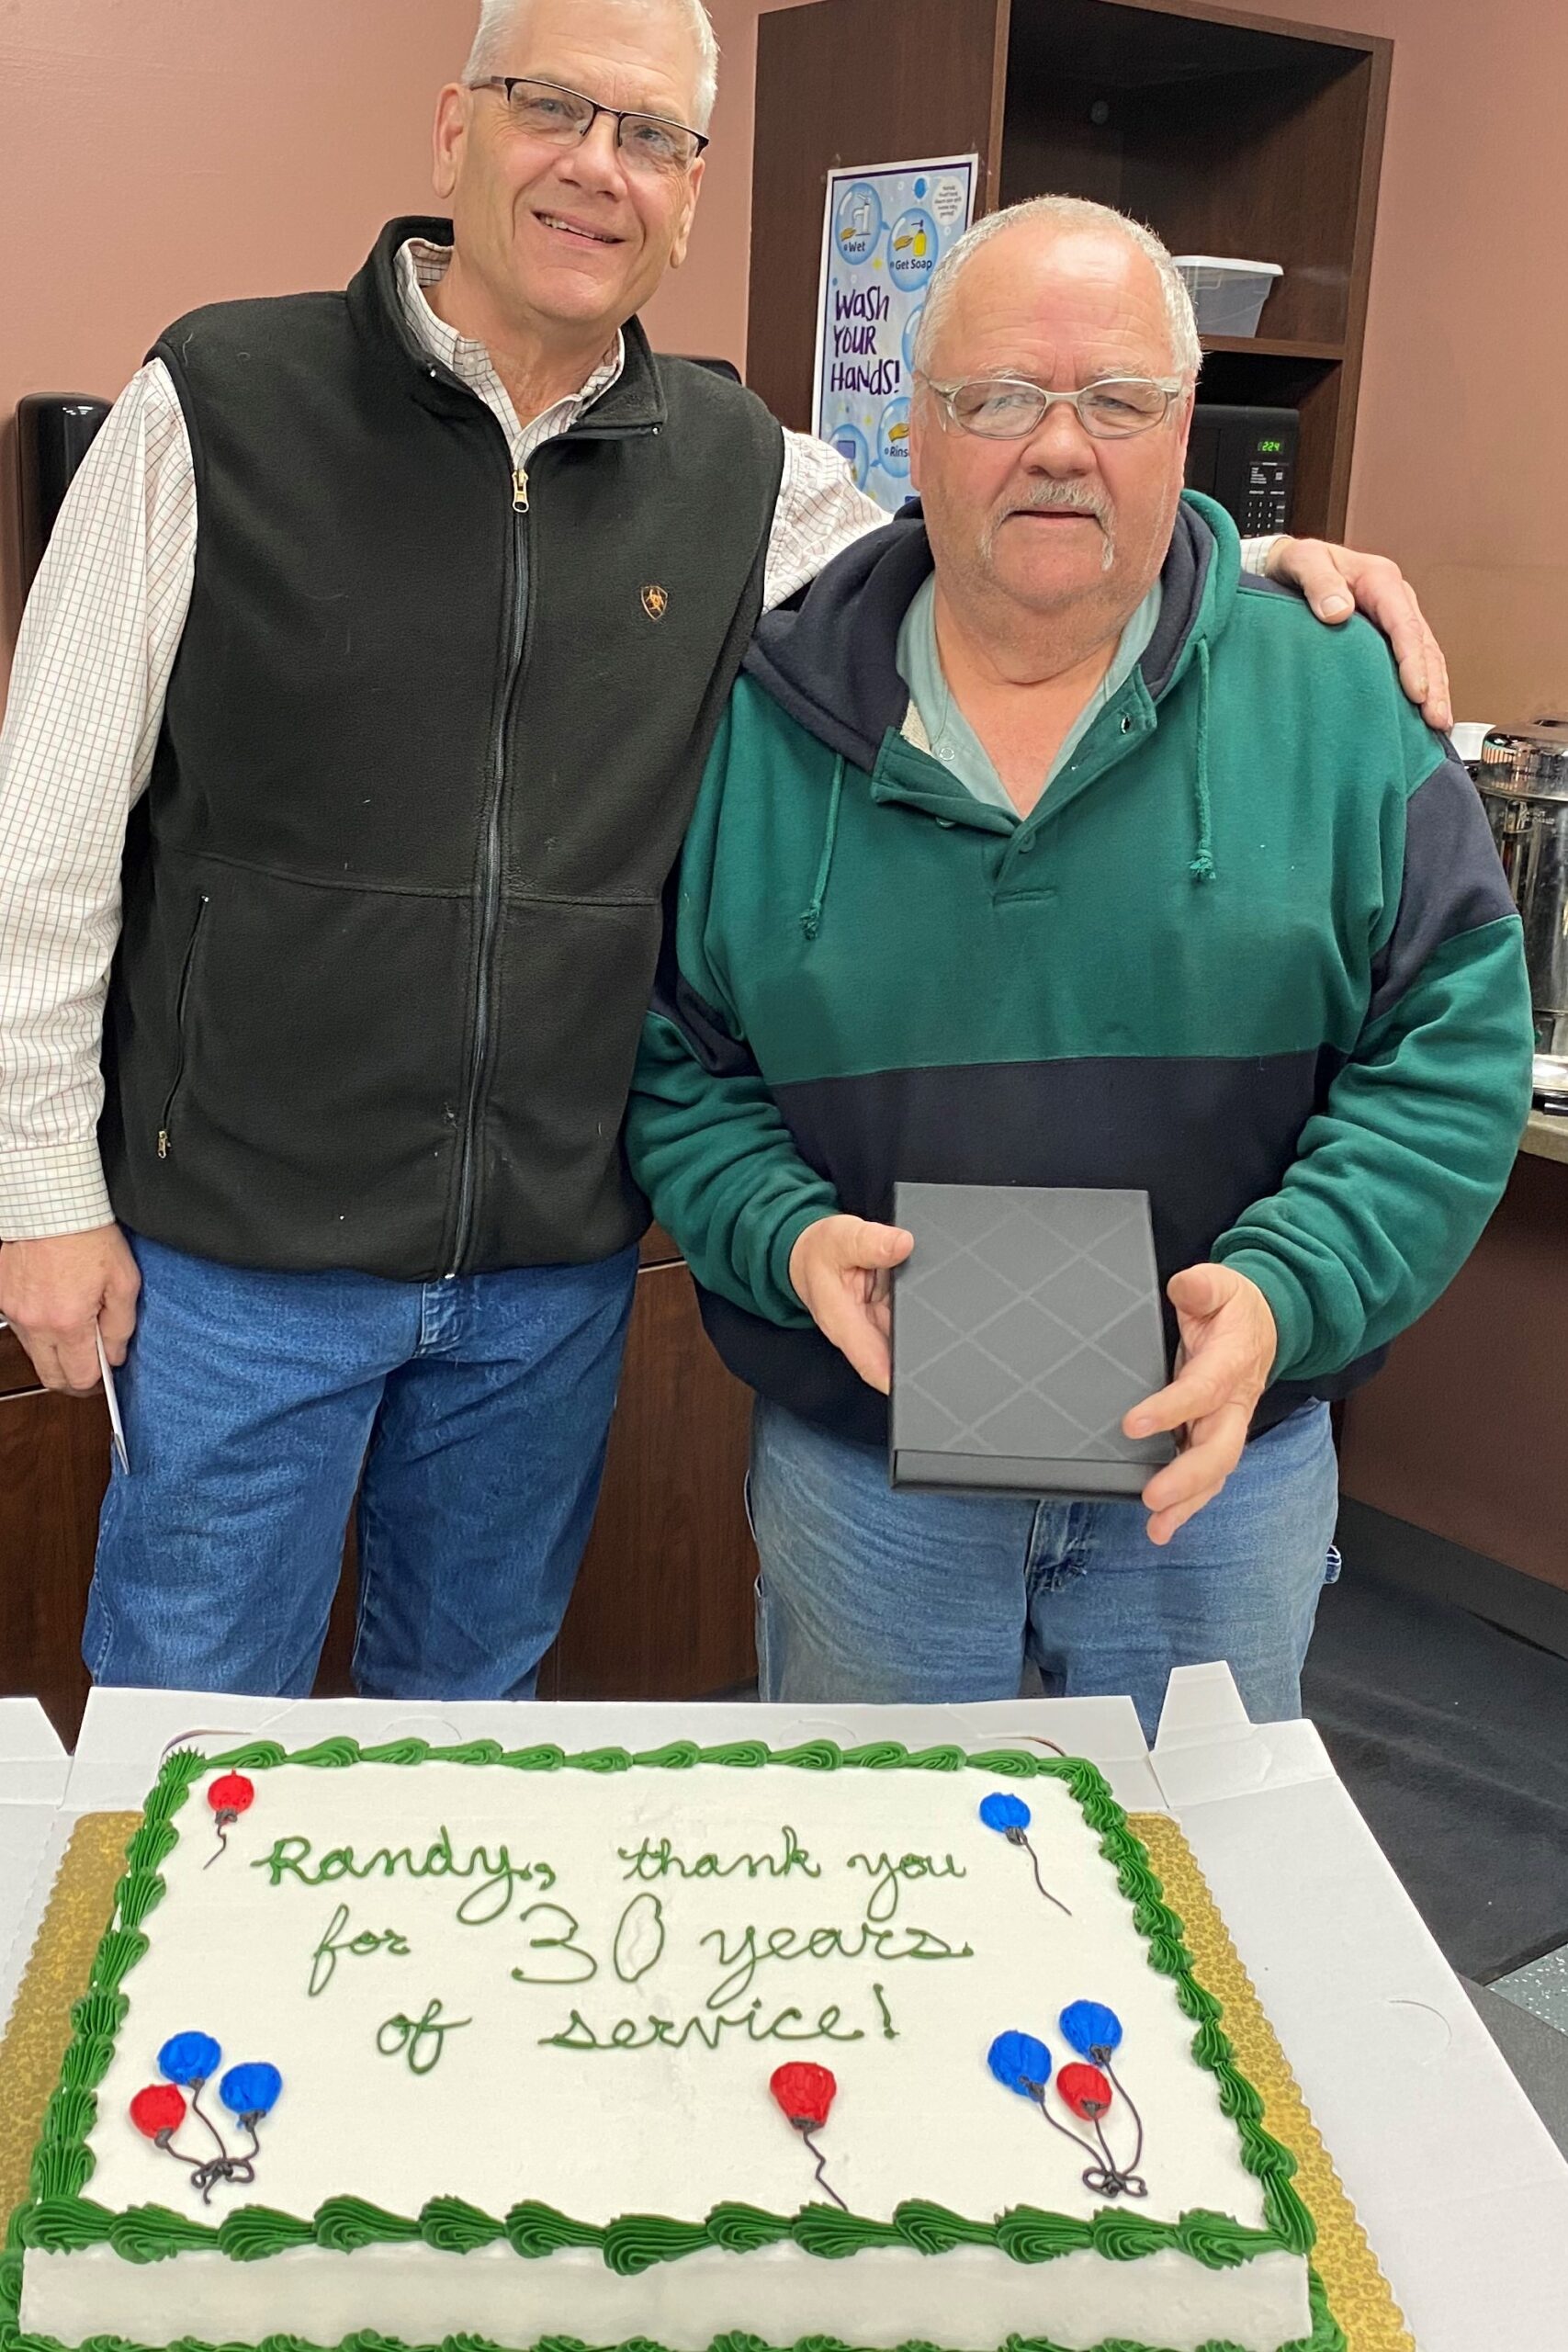 Congratulations Randy on 30 Years of Service at NPS!